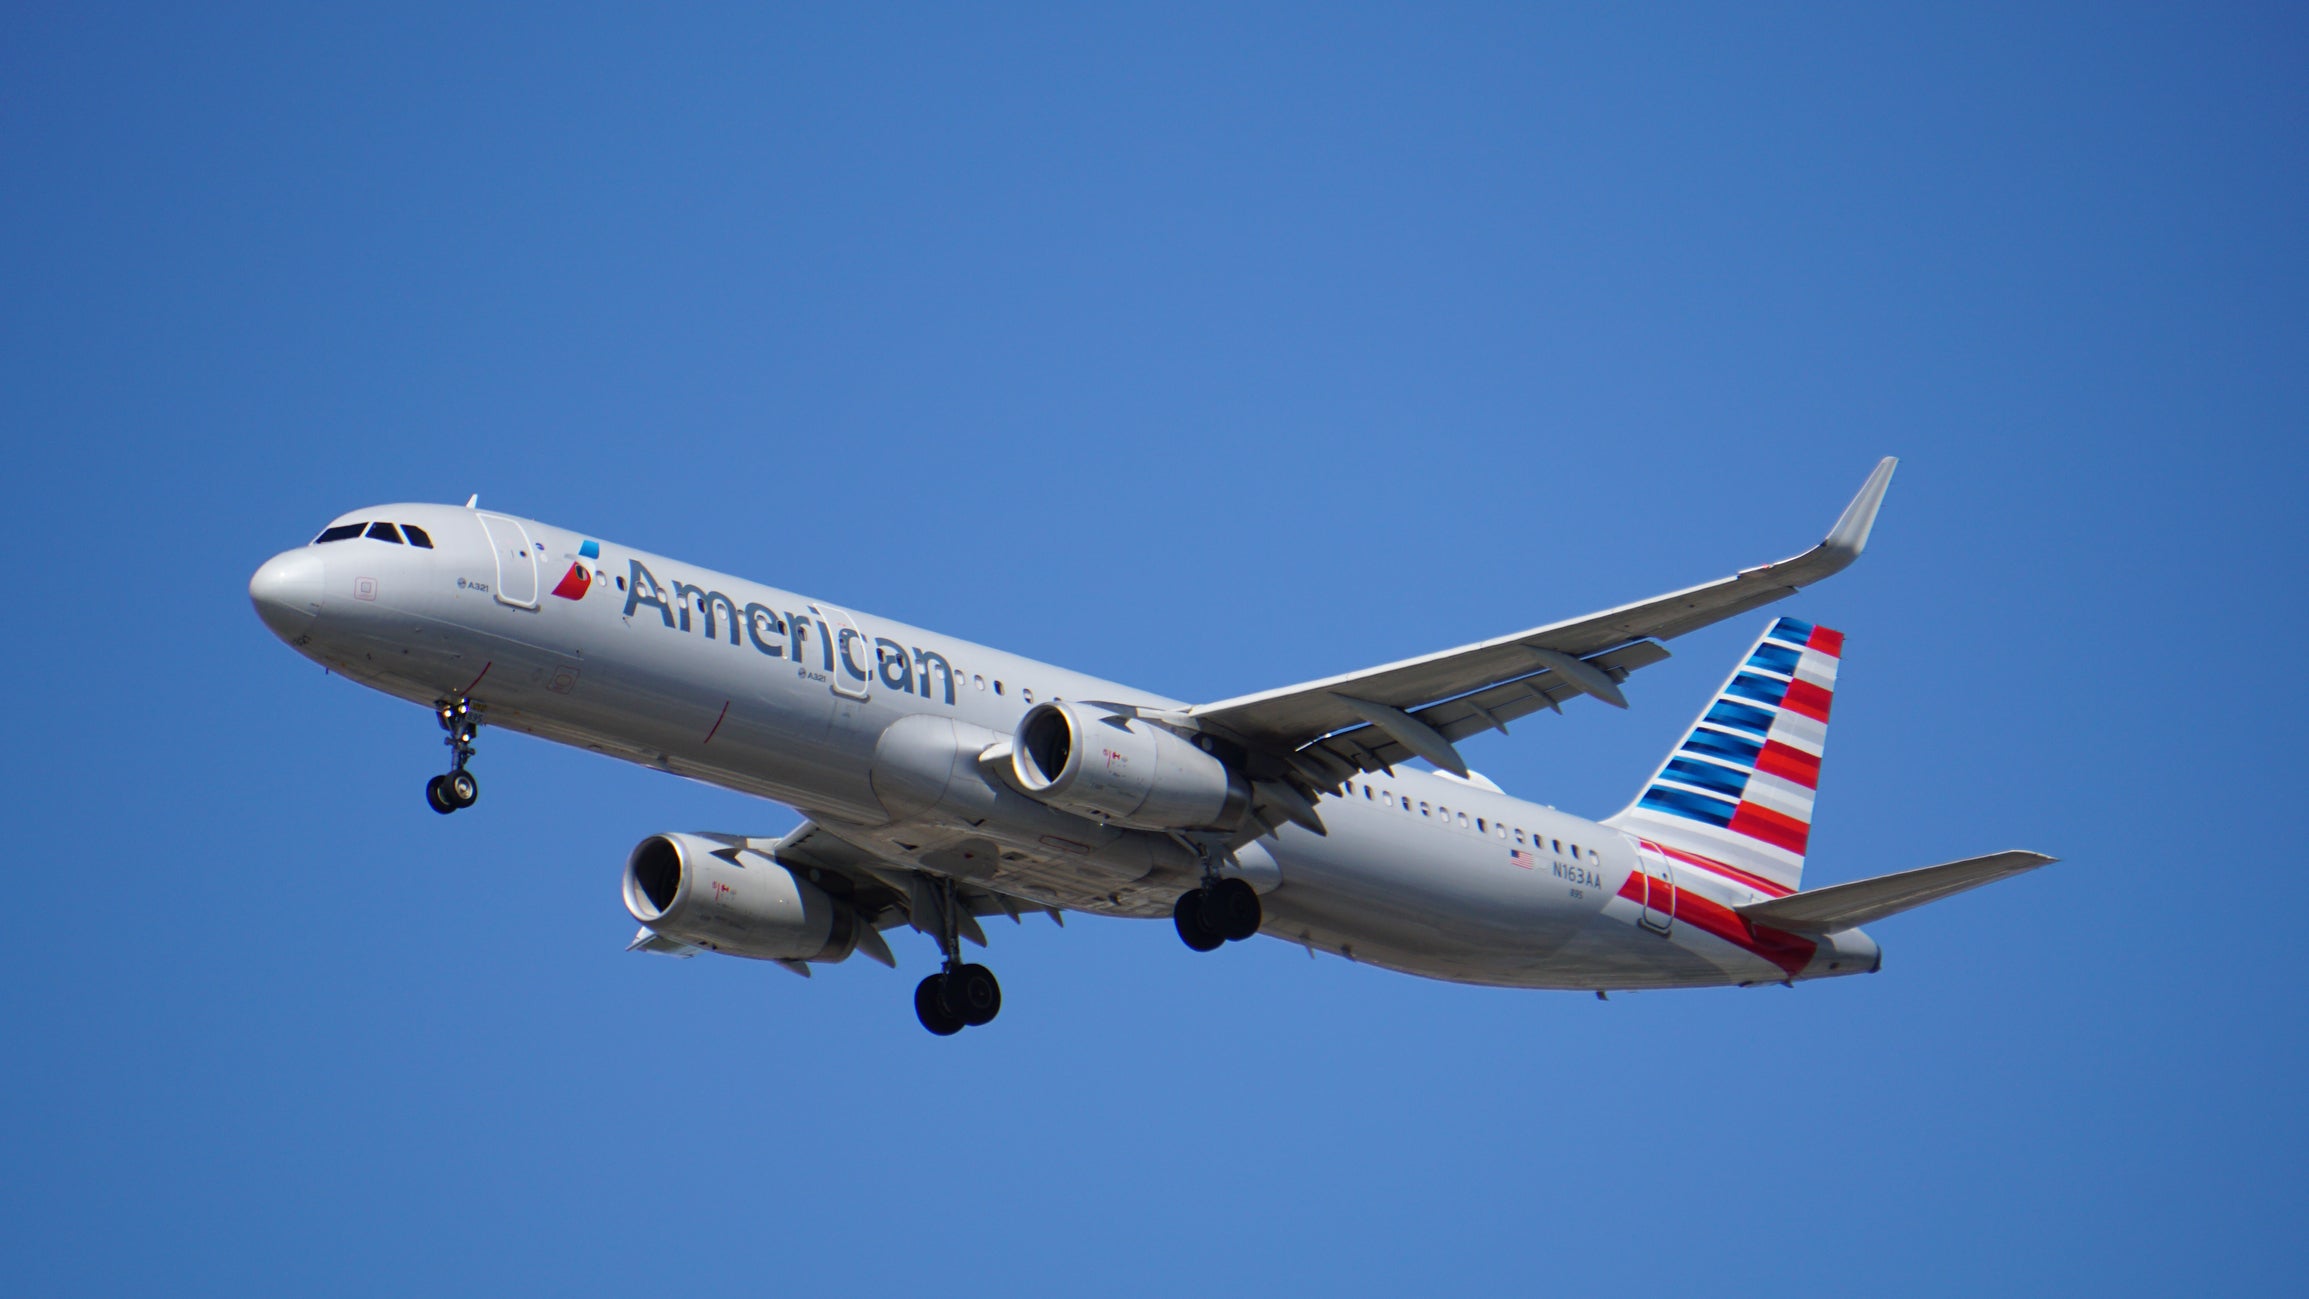 The food trolley came loose during the American Airlines flight